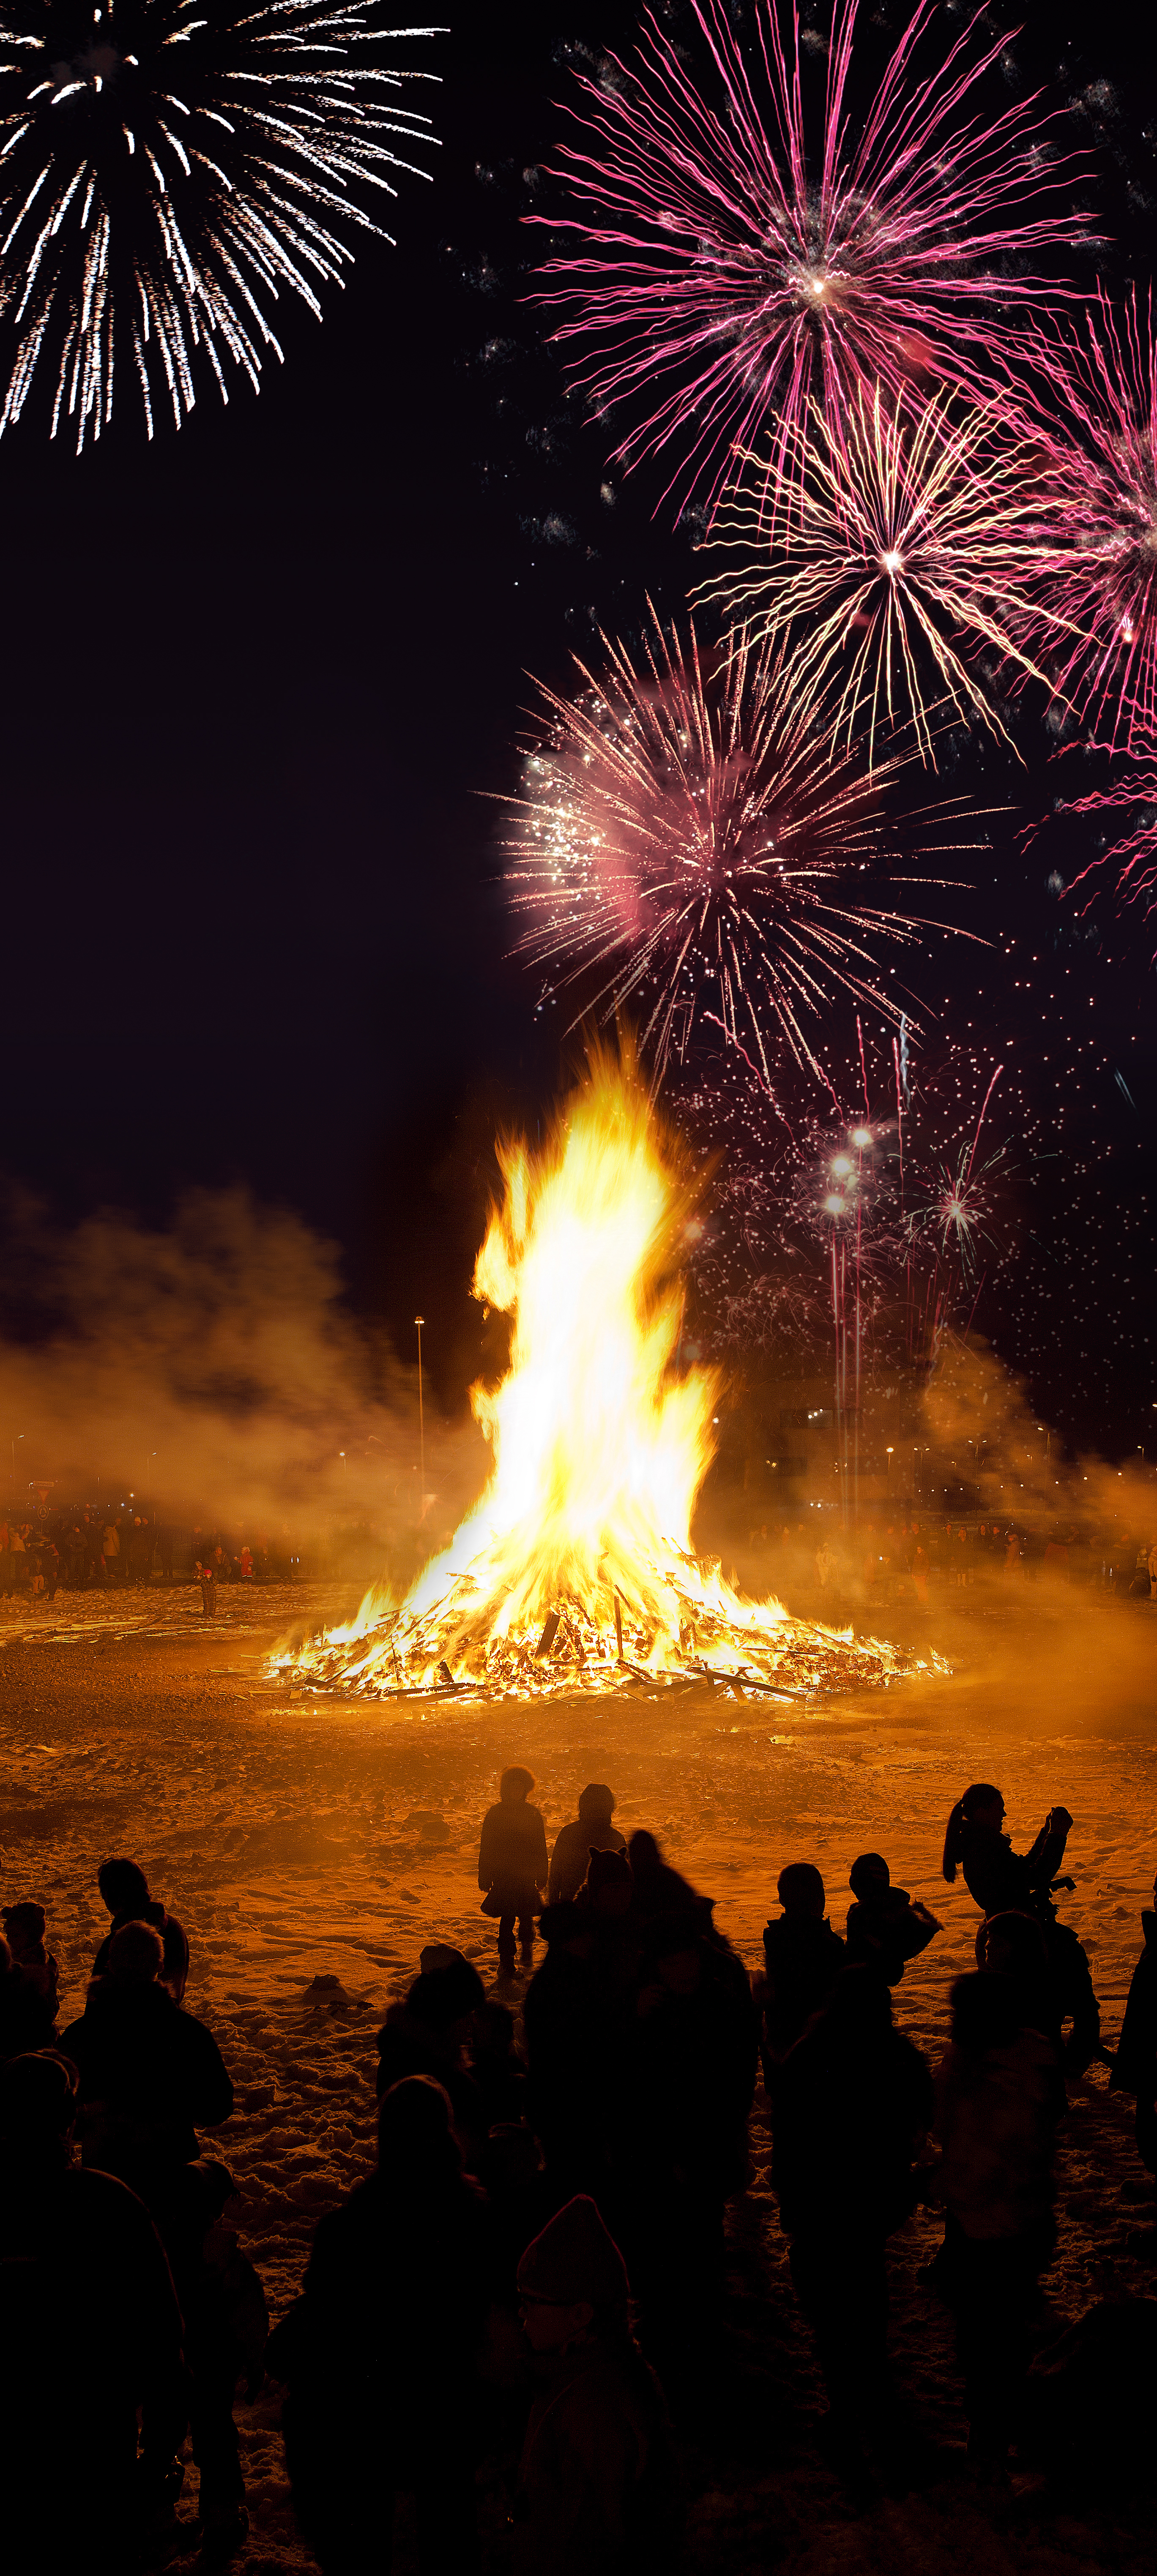 Bonfires are a popular way for locals to prepare for new year's celebrations in Reykjavík